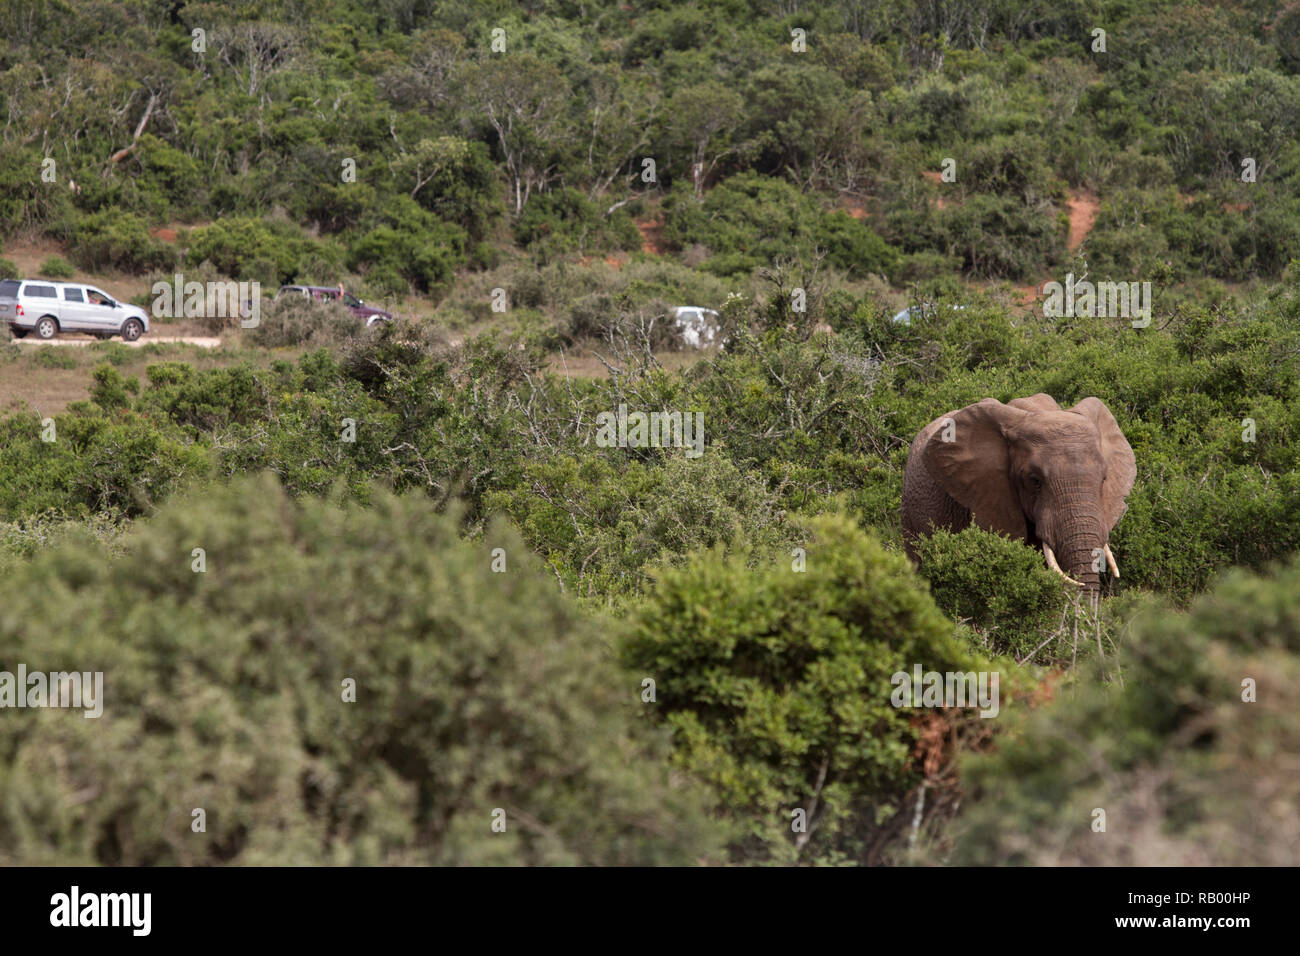 Male elephant walking through bush past cars on the road, Addo Elephant National Park, Eastern Cape, South Africa Stock Photo